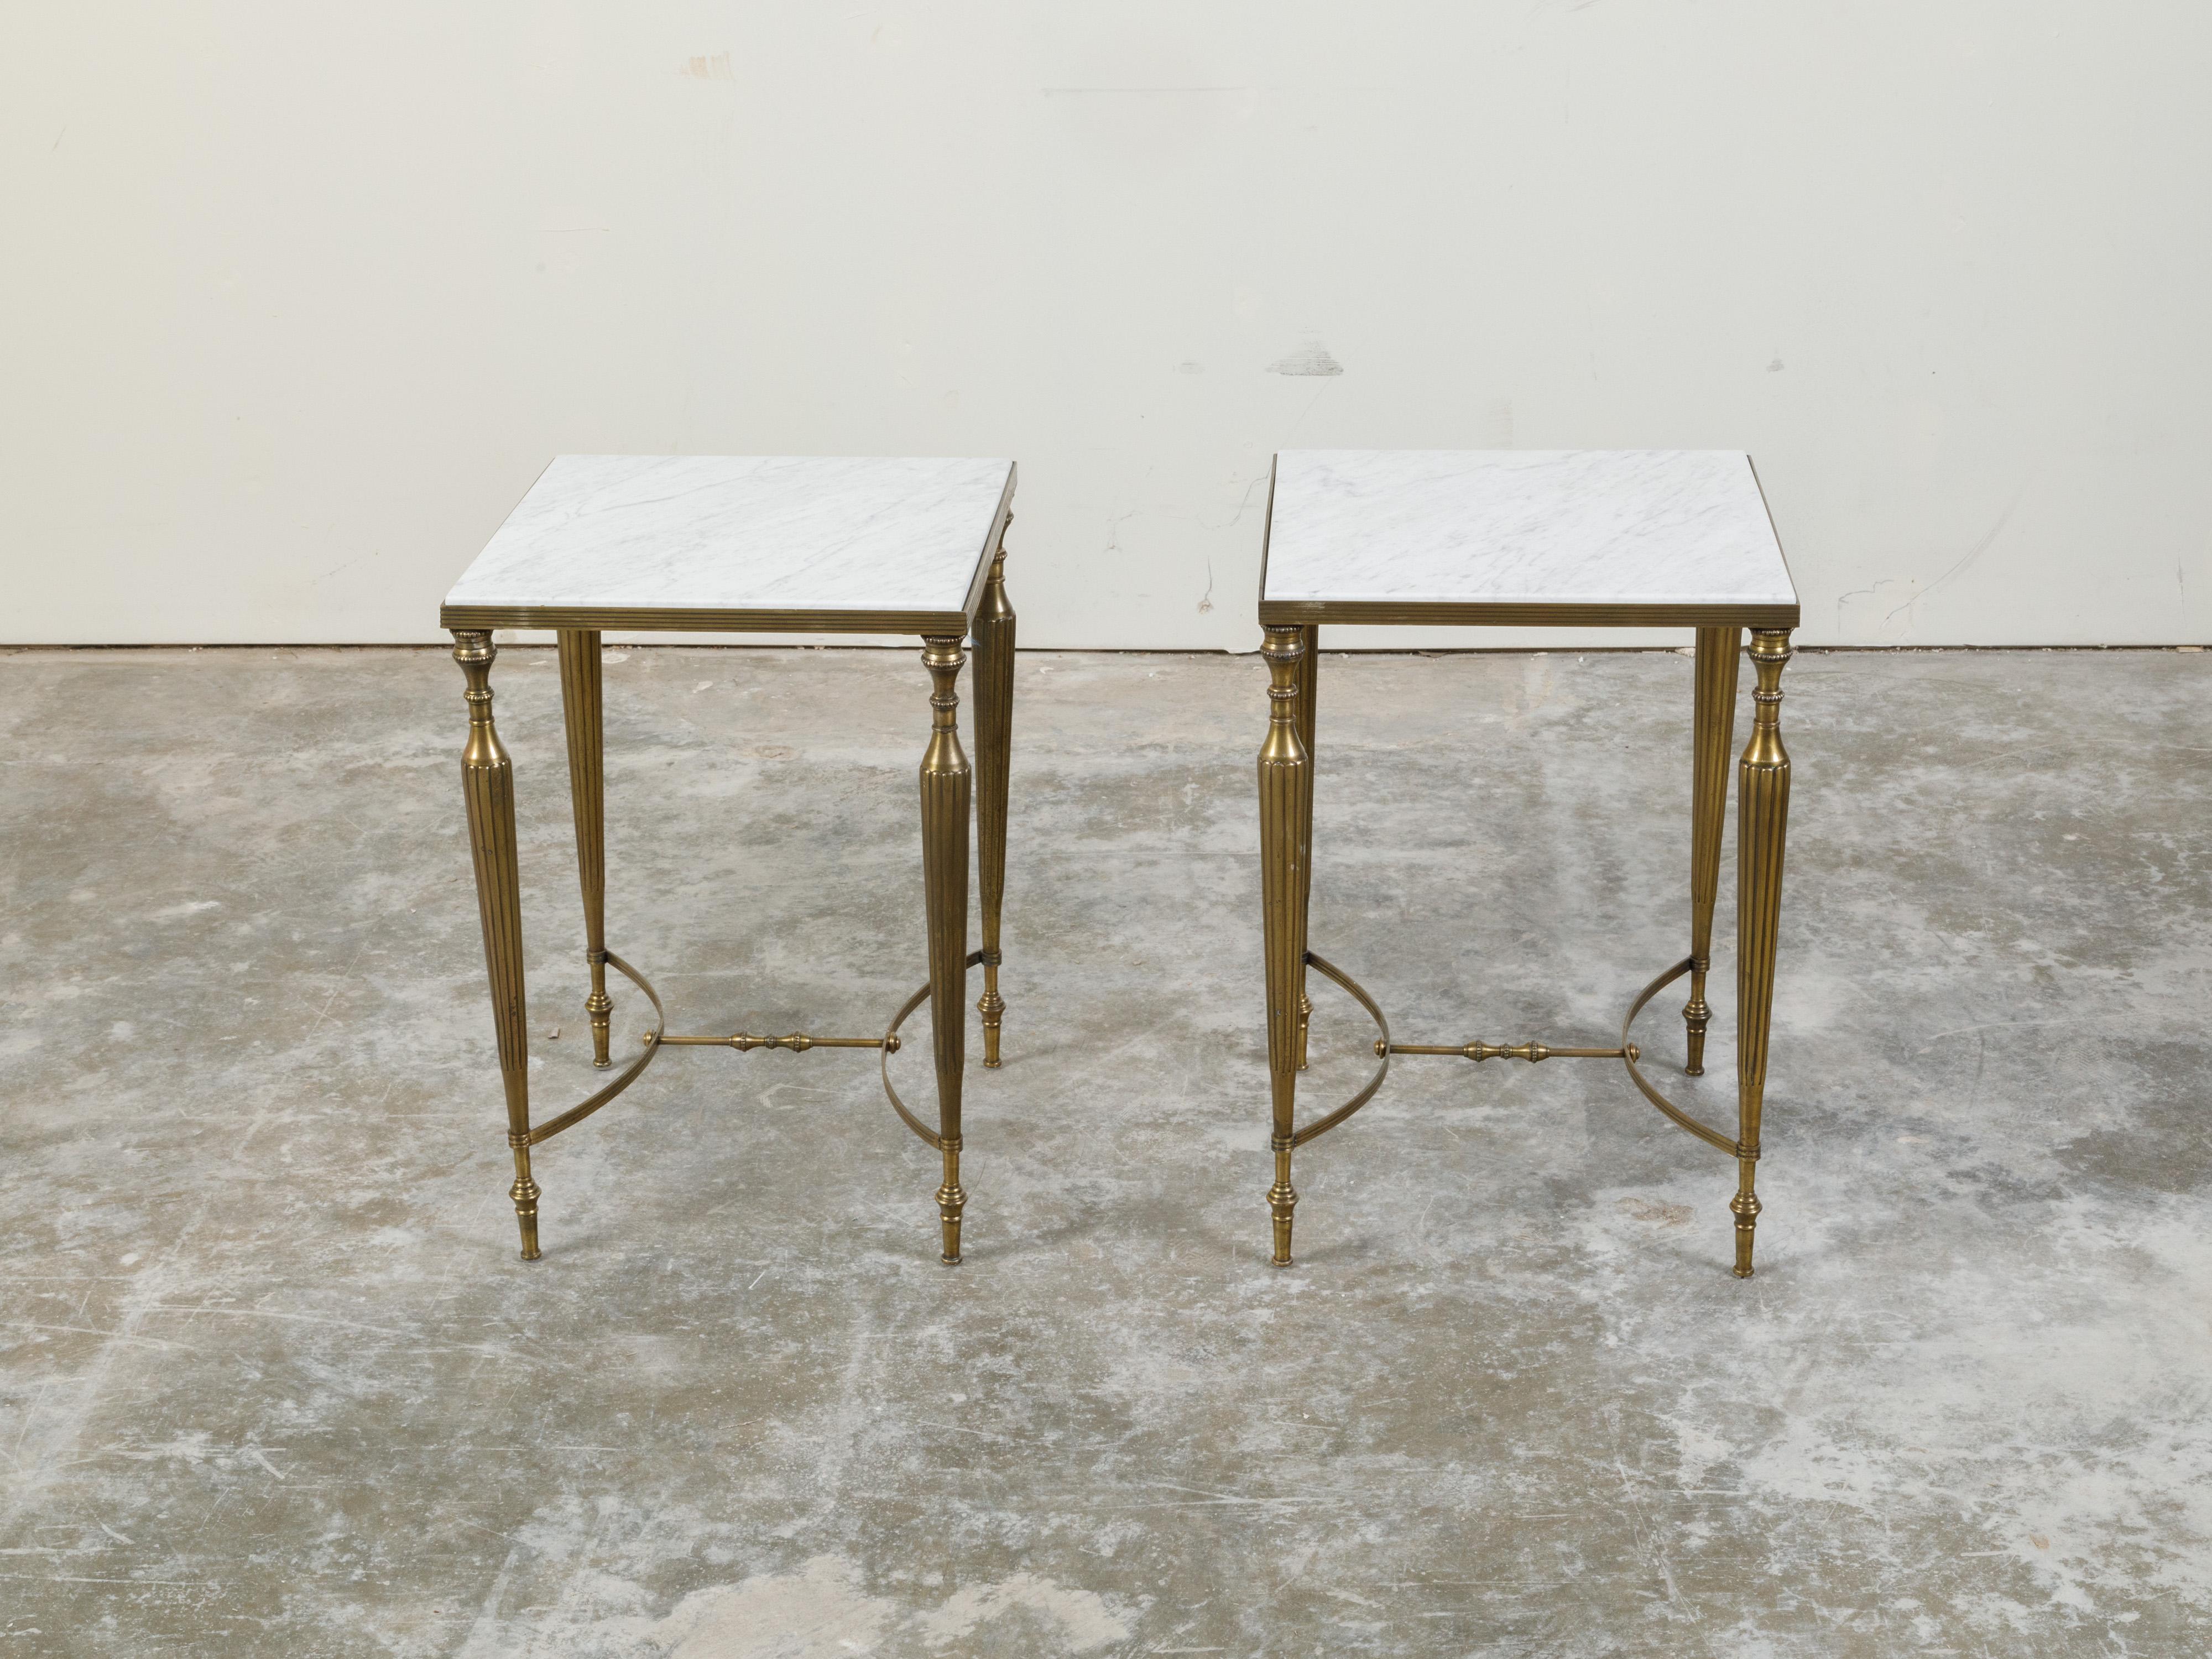 Pair of Midcentury Brass Side Tables with White Marble Tops and Reeded Legs 1